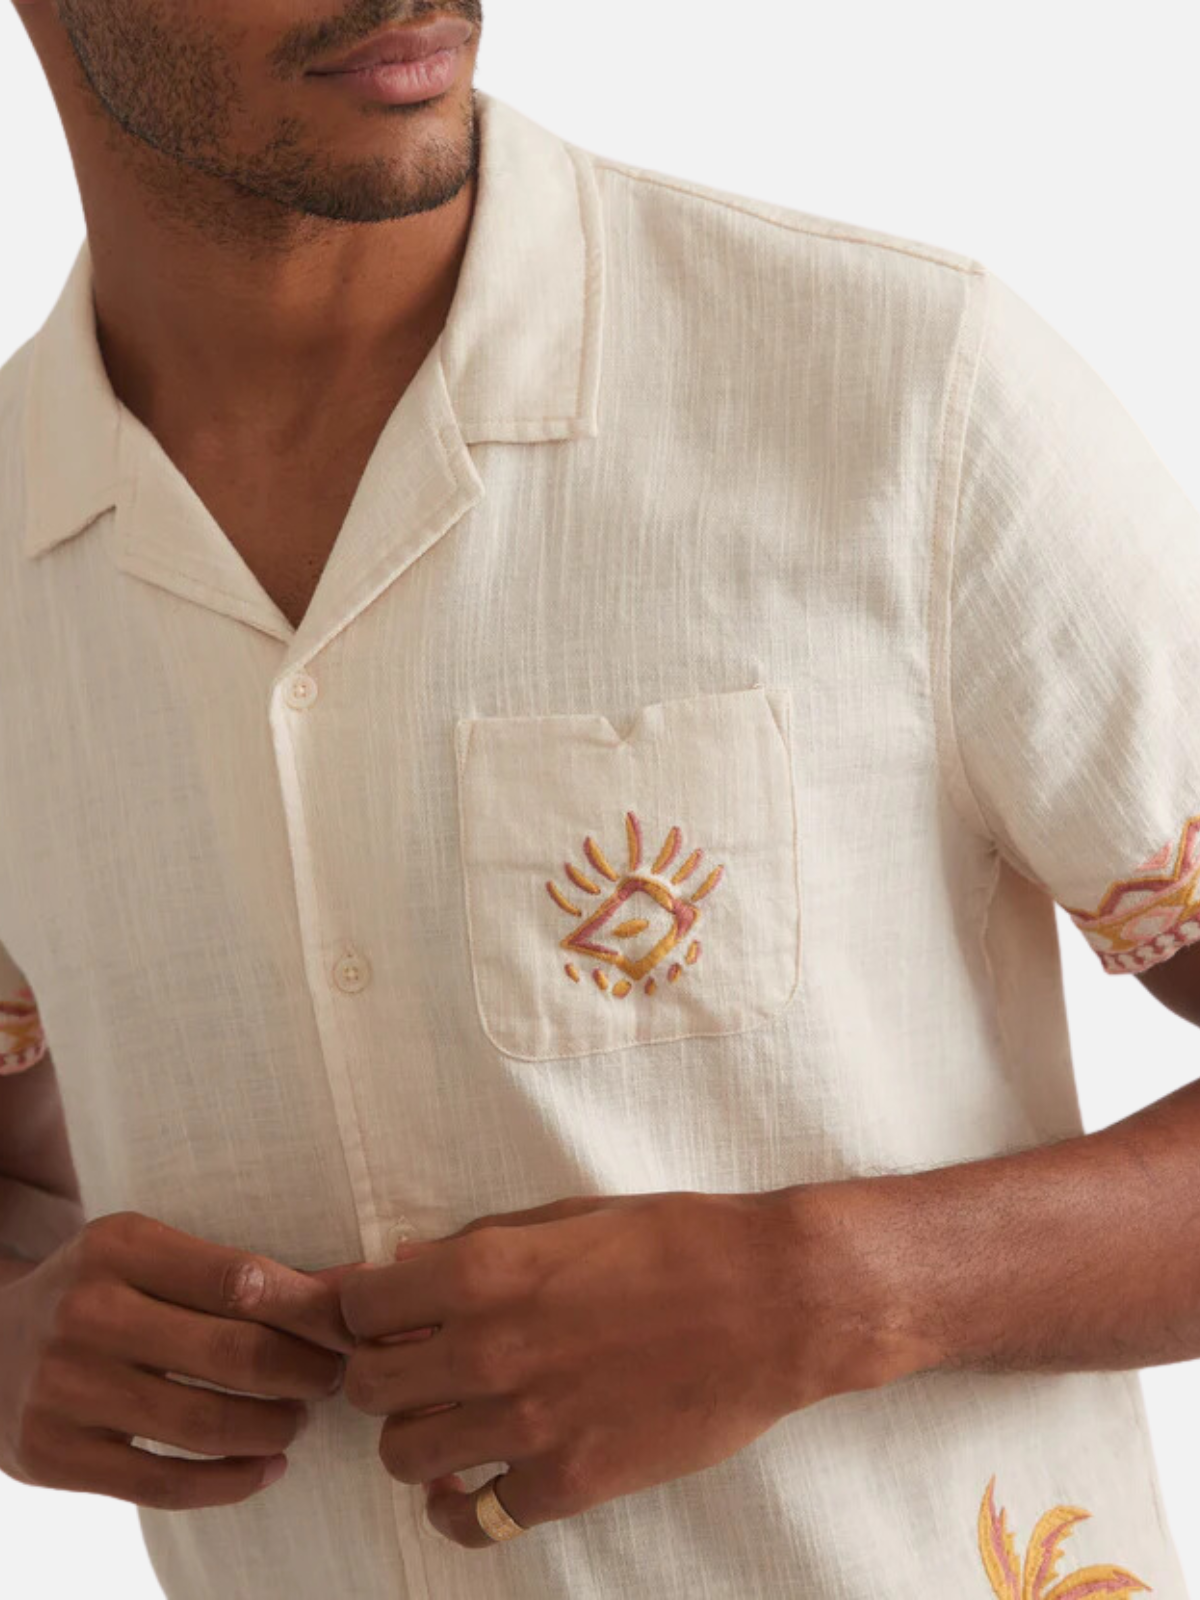 marine layer embroidered resort stretch selvage shirt natural coral cream white orange yellow pink camp cuban collar ss short sleeve button up kempt athens ga georgia men's clothing store